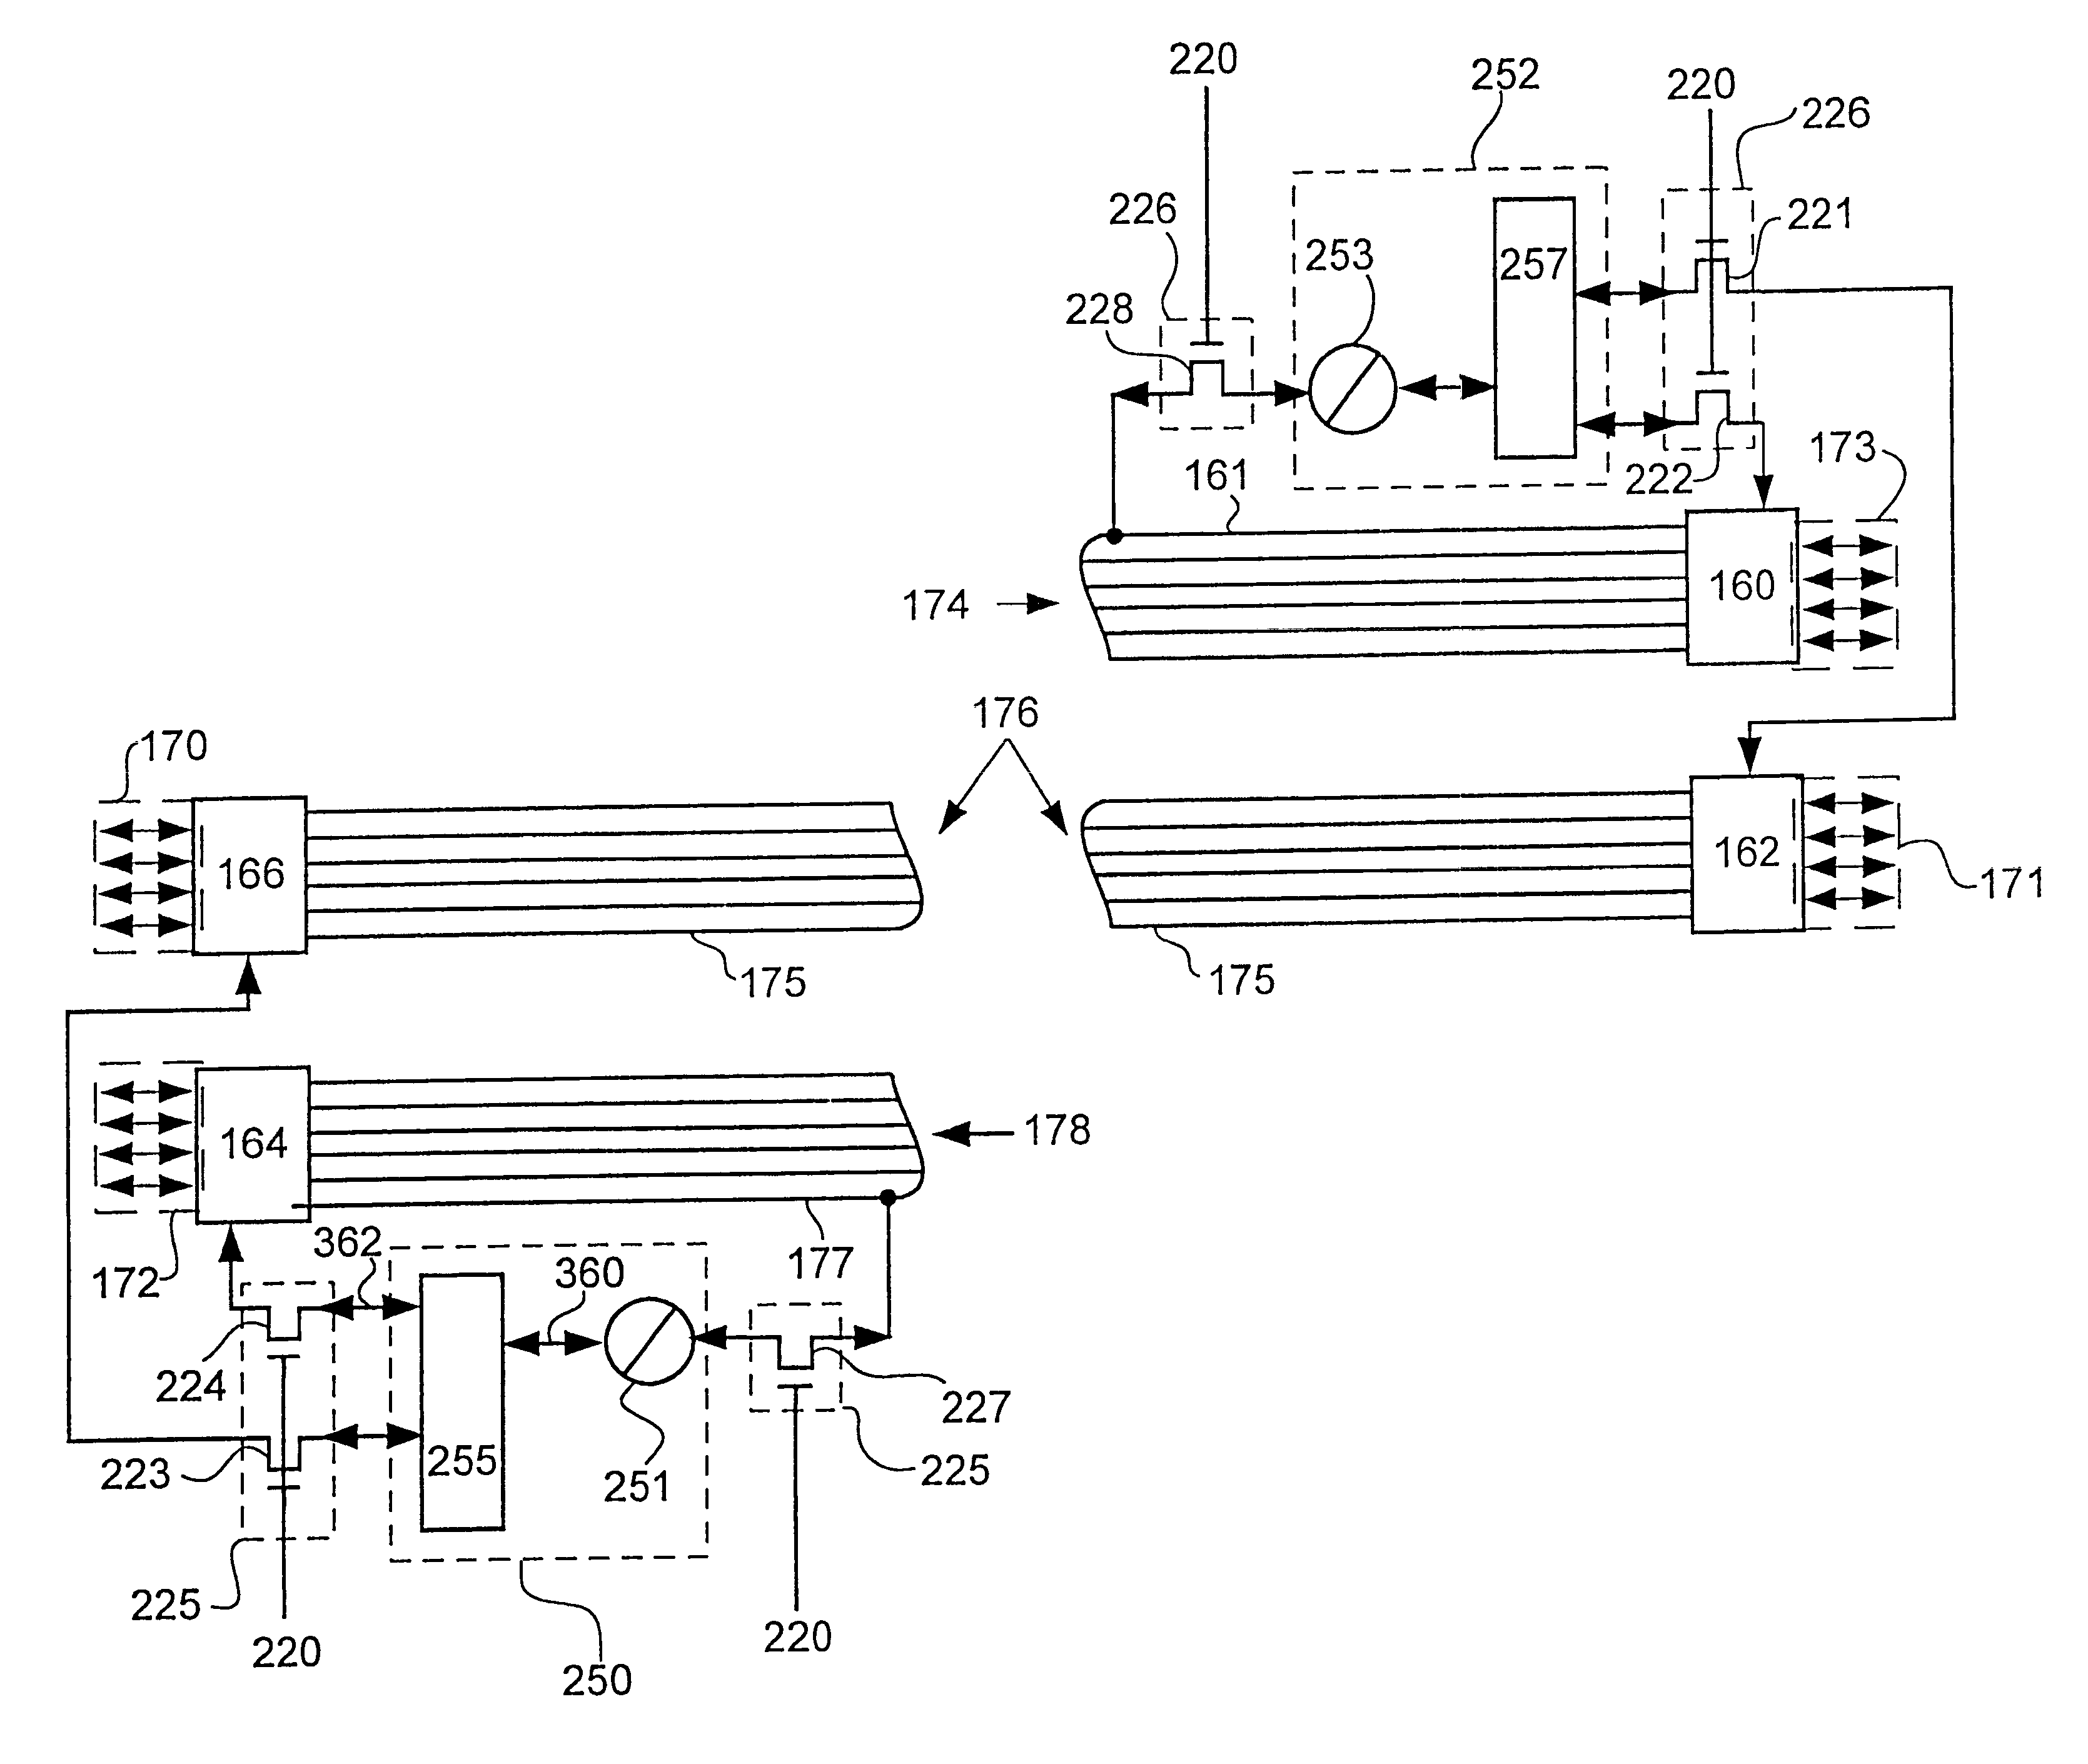 Integrated circuit incorporating a programmable cross-bar switch